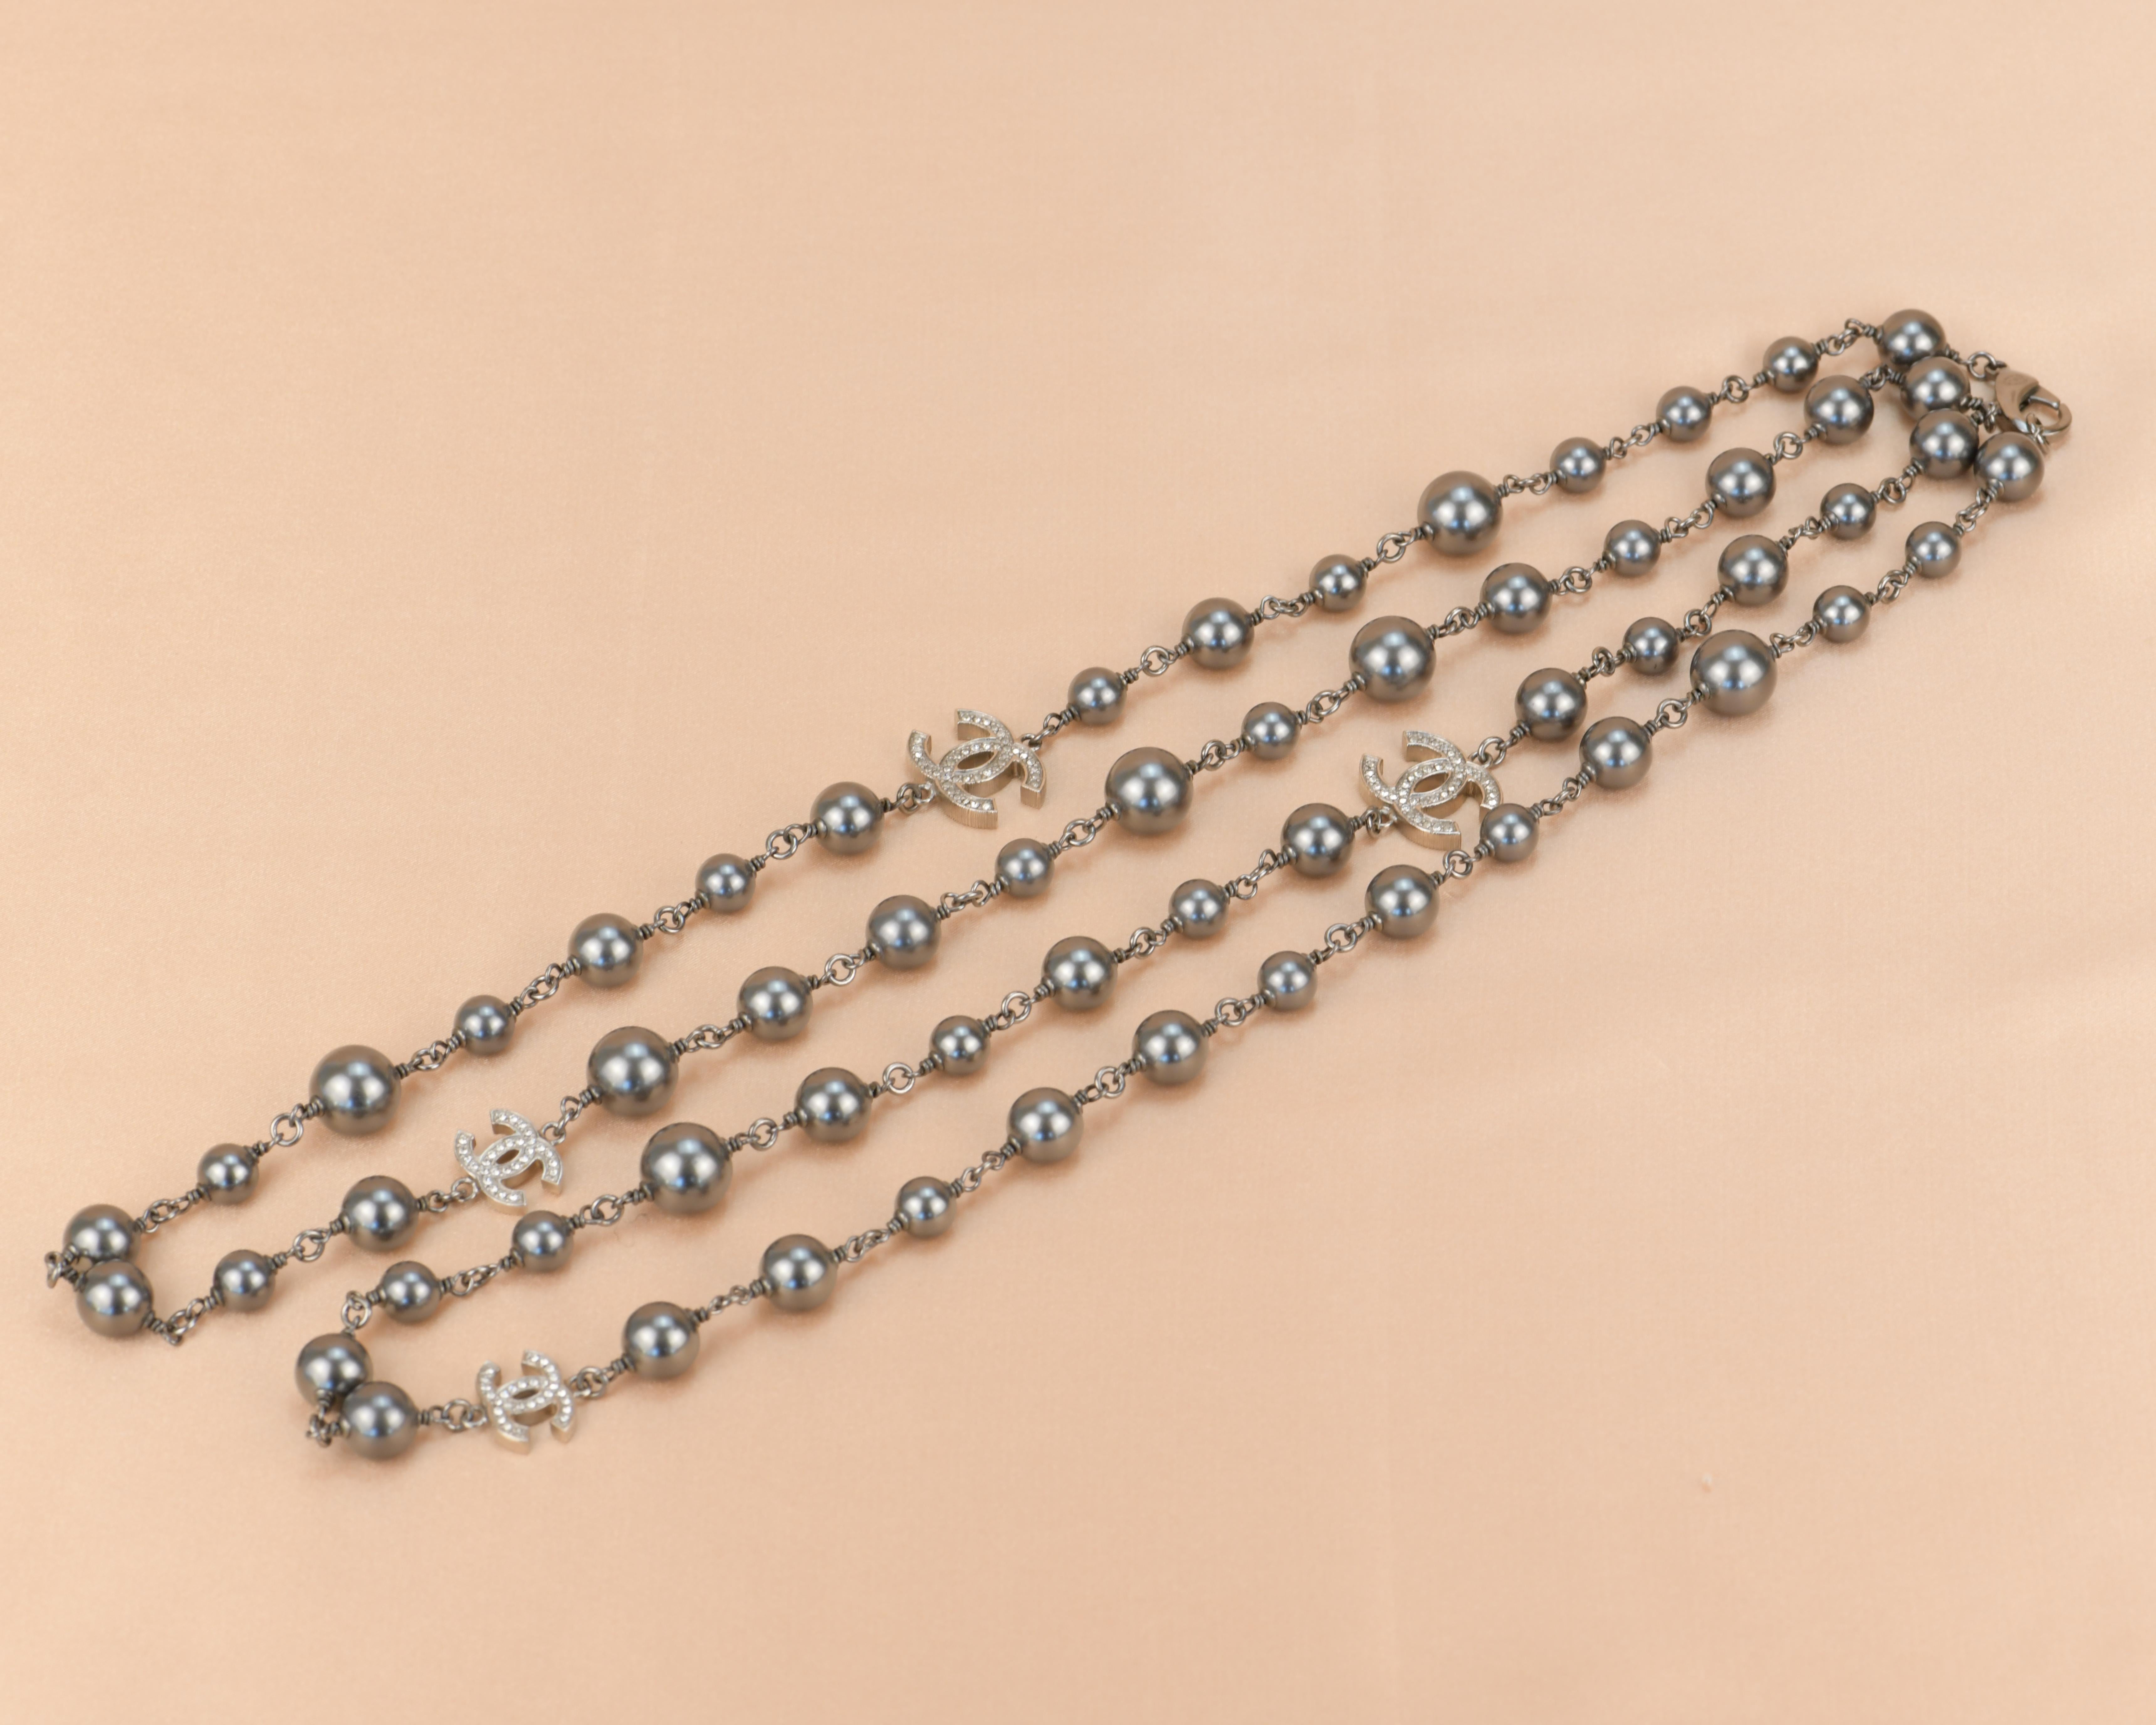 Bead Chanel CC Pearl Crystal Silver Grey Long Necklace